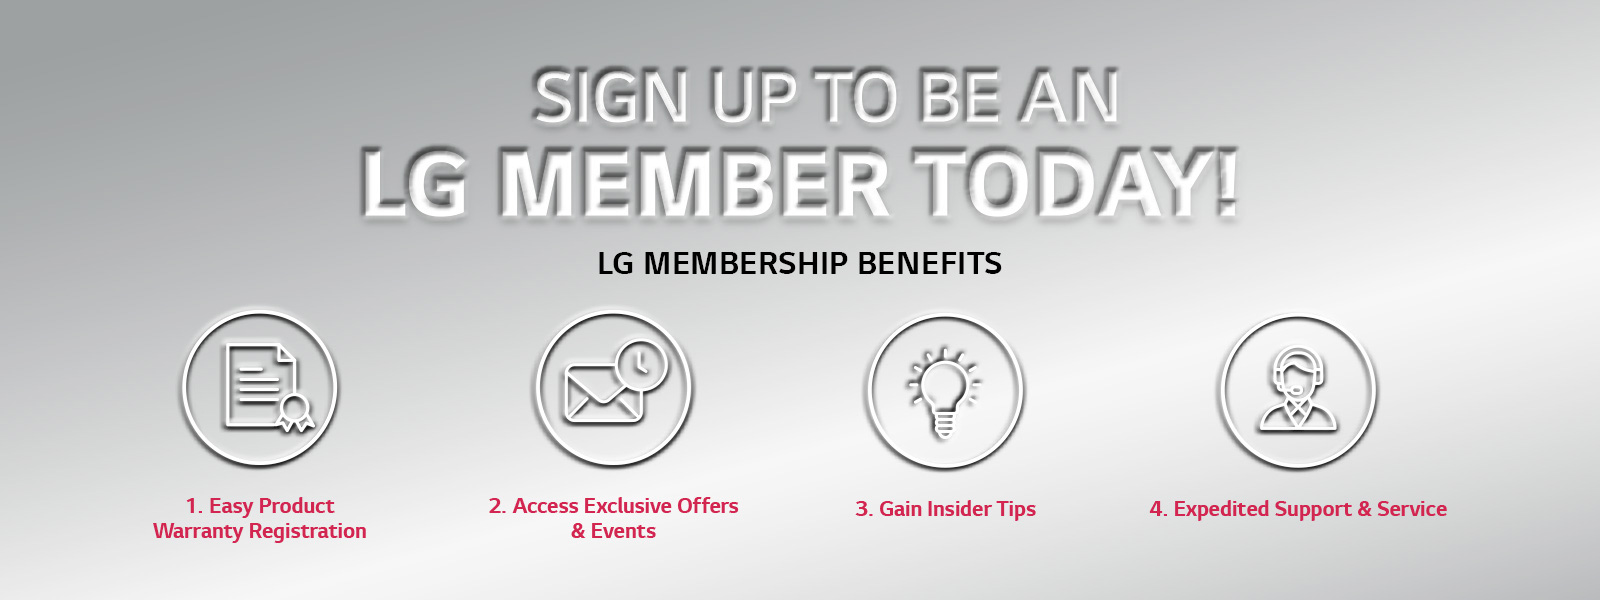 SIGN UP TO BE A LG MEMBER TODAY! LG MEMBERSHIP BENEFITS 1. Easy Product Warranty Registration 2. Access Exclusive Offers & Events 3. Gain Insider tips 4. Expedited Support $ Service